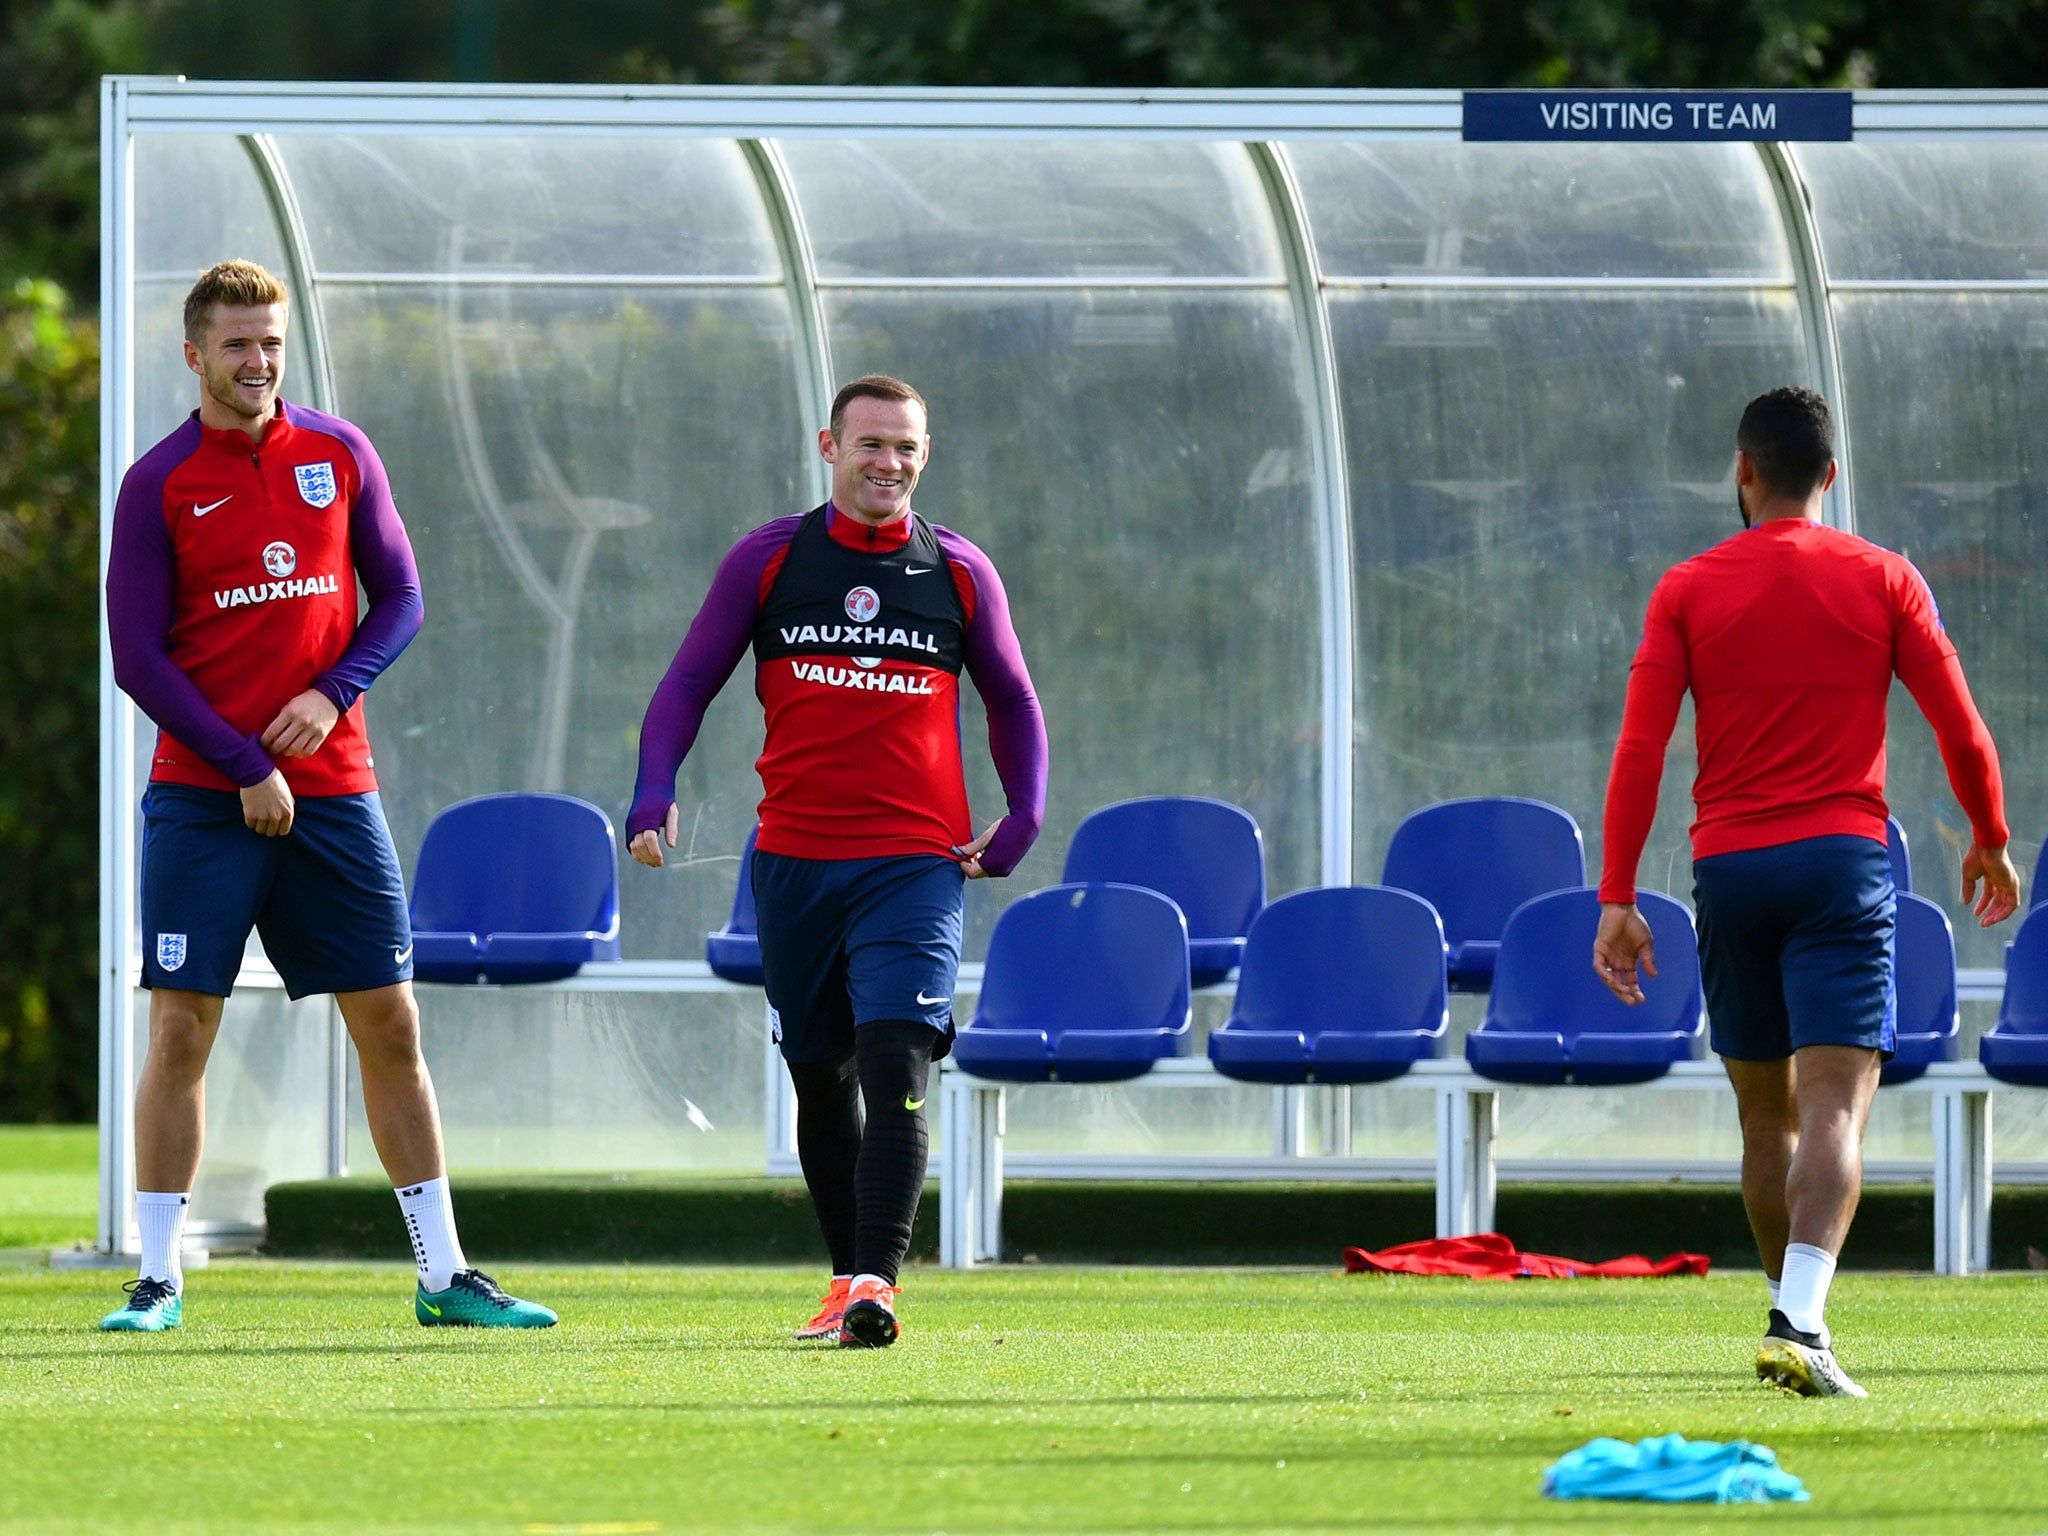 Wayne Rooney's form has taken a "little dip" in recent weeks, Slovenia's manager believes